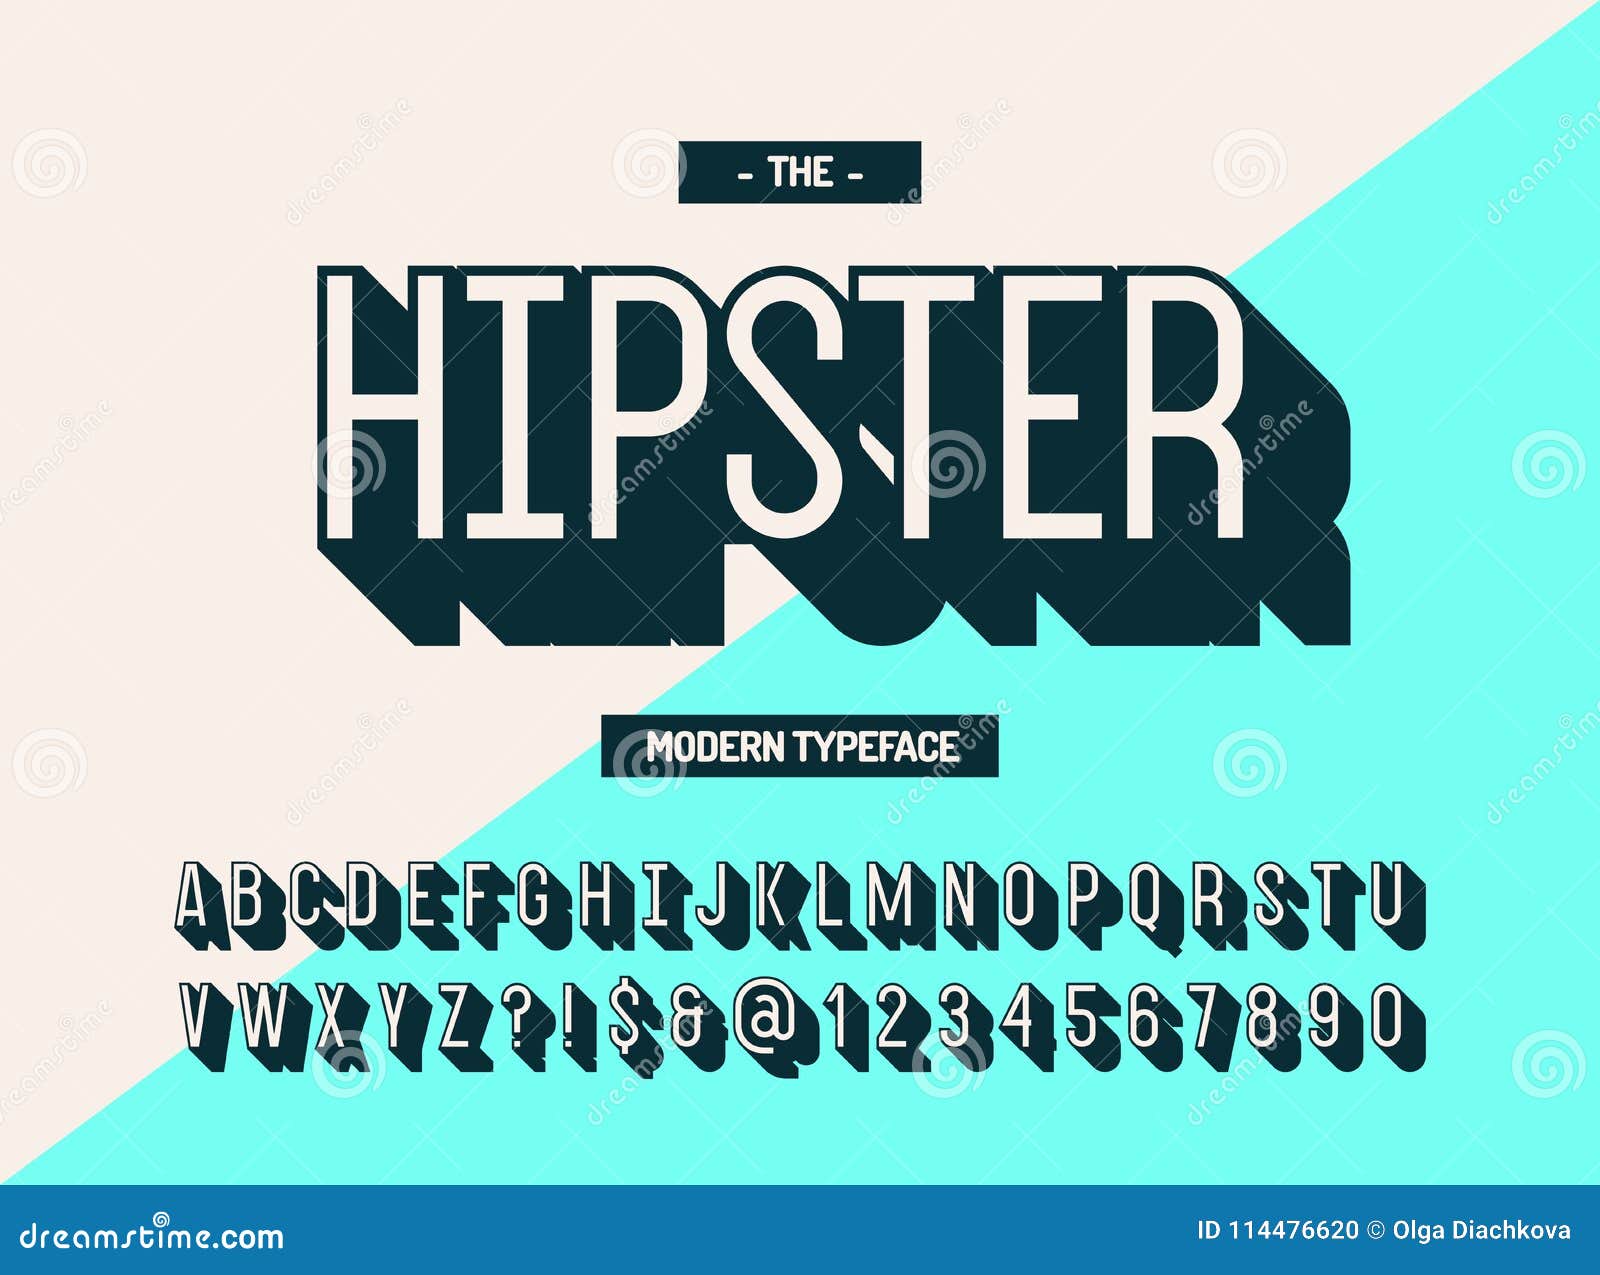 Hipster Modern Typeface 3d Style. Cool Font Stock Vector - Illustration ...